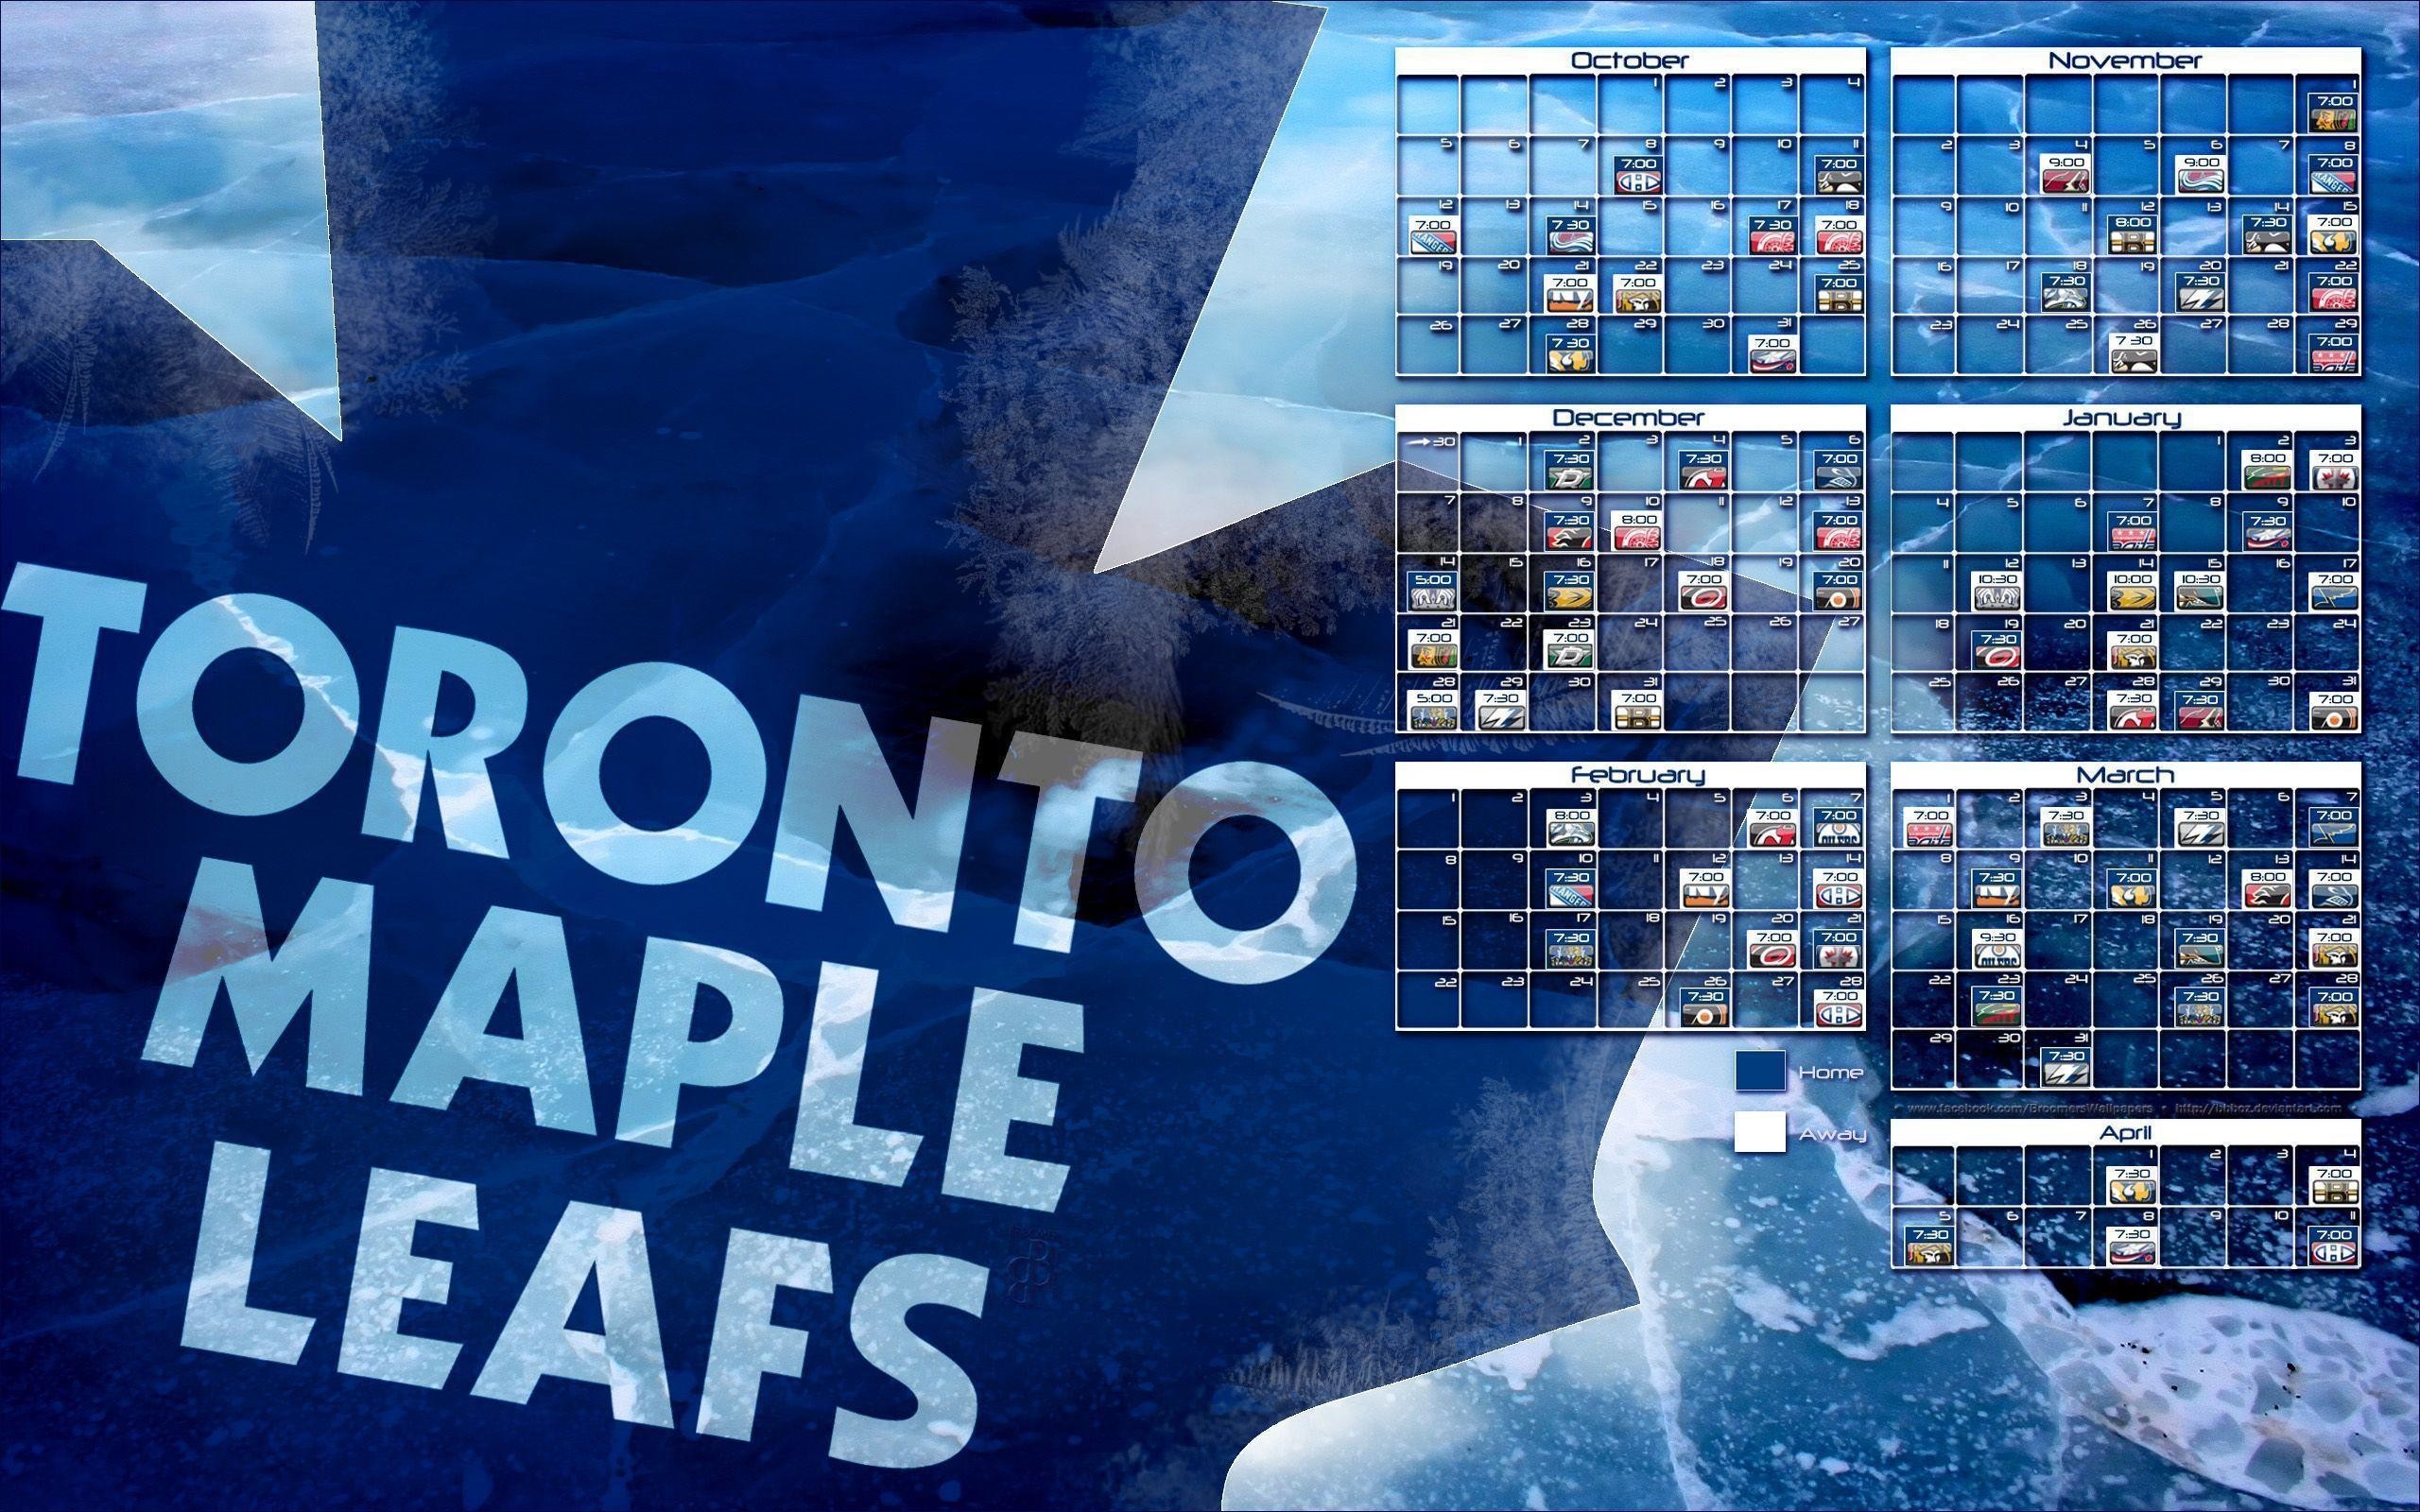 2560x1600 2014-2015 Toronto Maple Leafs schedule wallpaper by bbboz on .